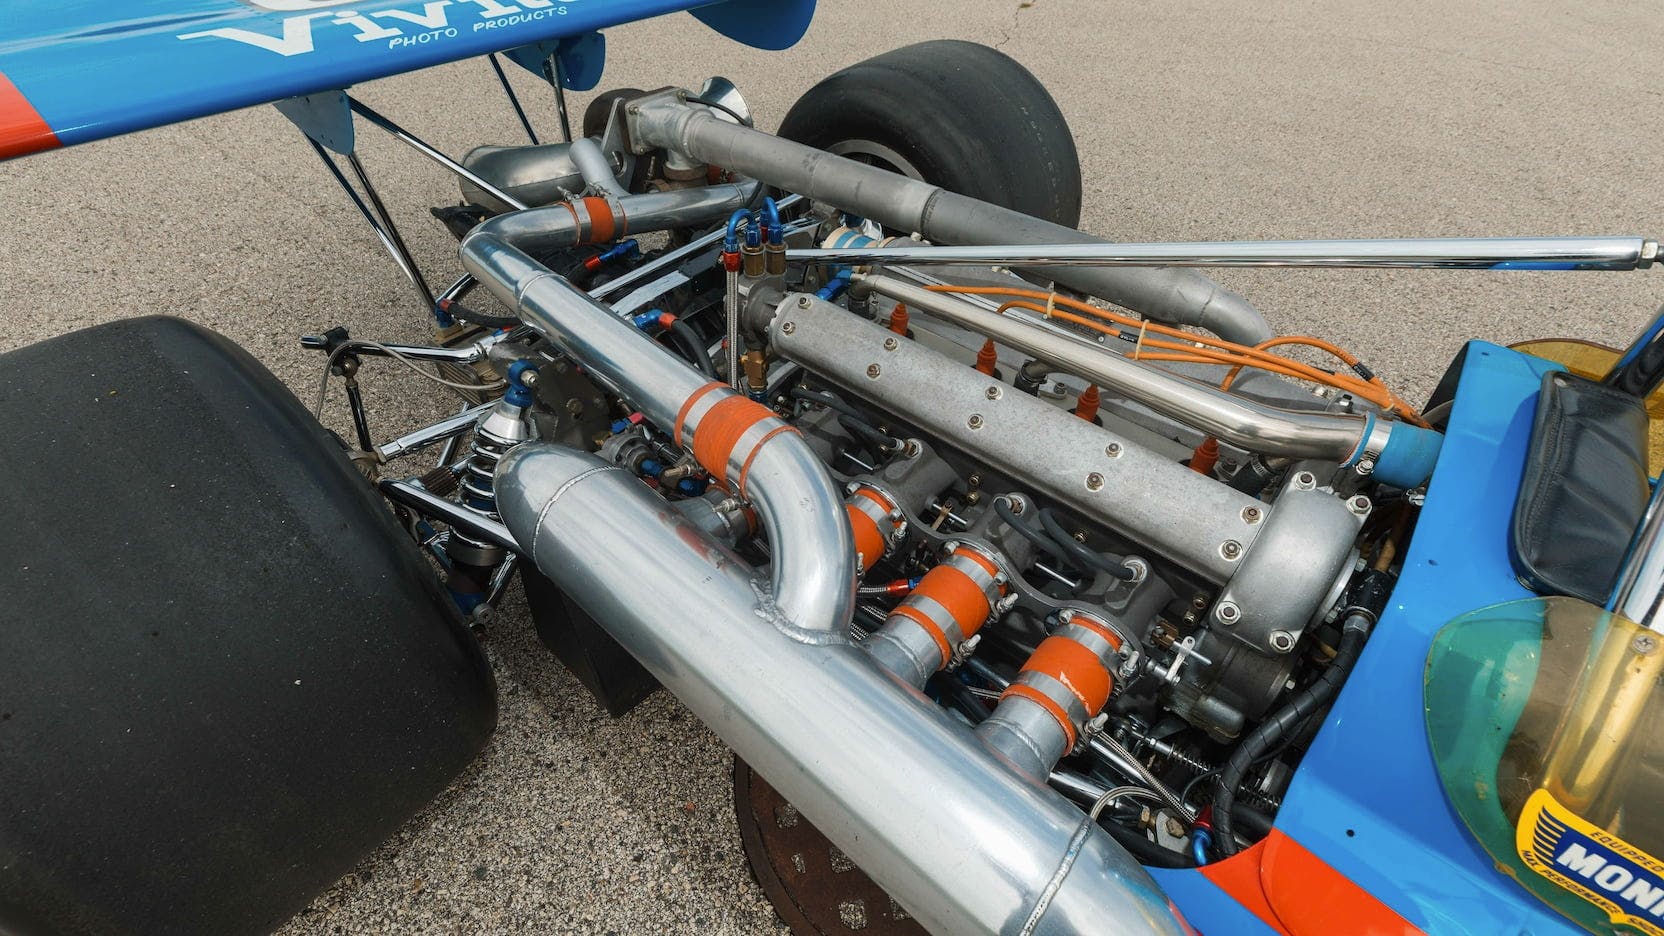 1968 Eagle Offenhauser Indy Car engine